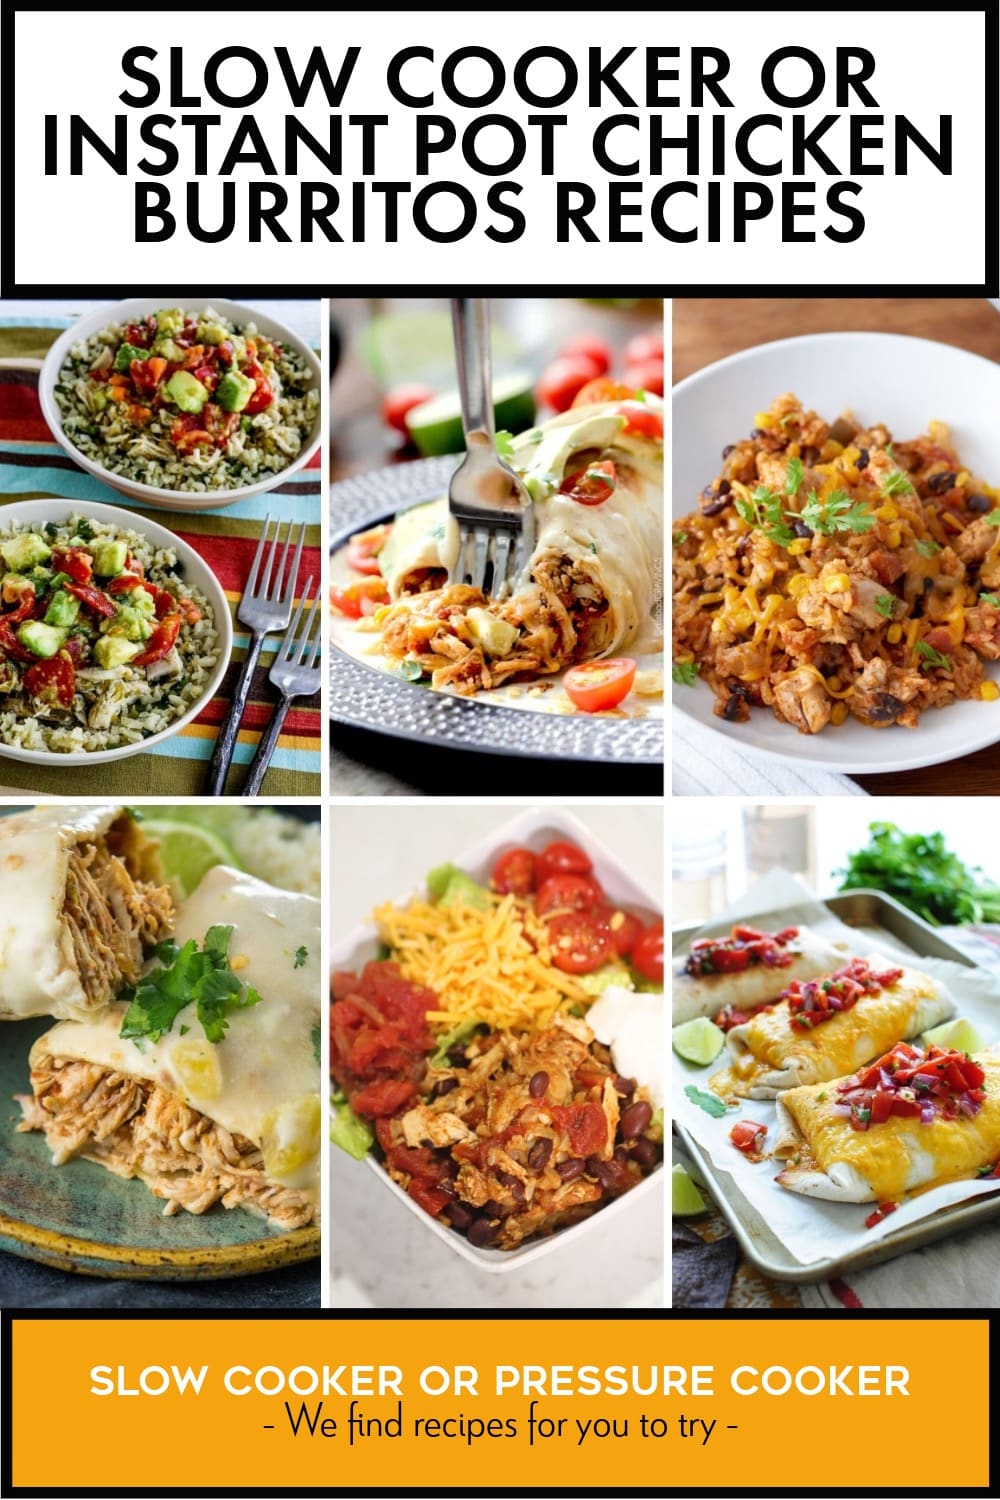 Pinterest image of Slow Cooker or Instant Pot Chicken Burritos Recipes